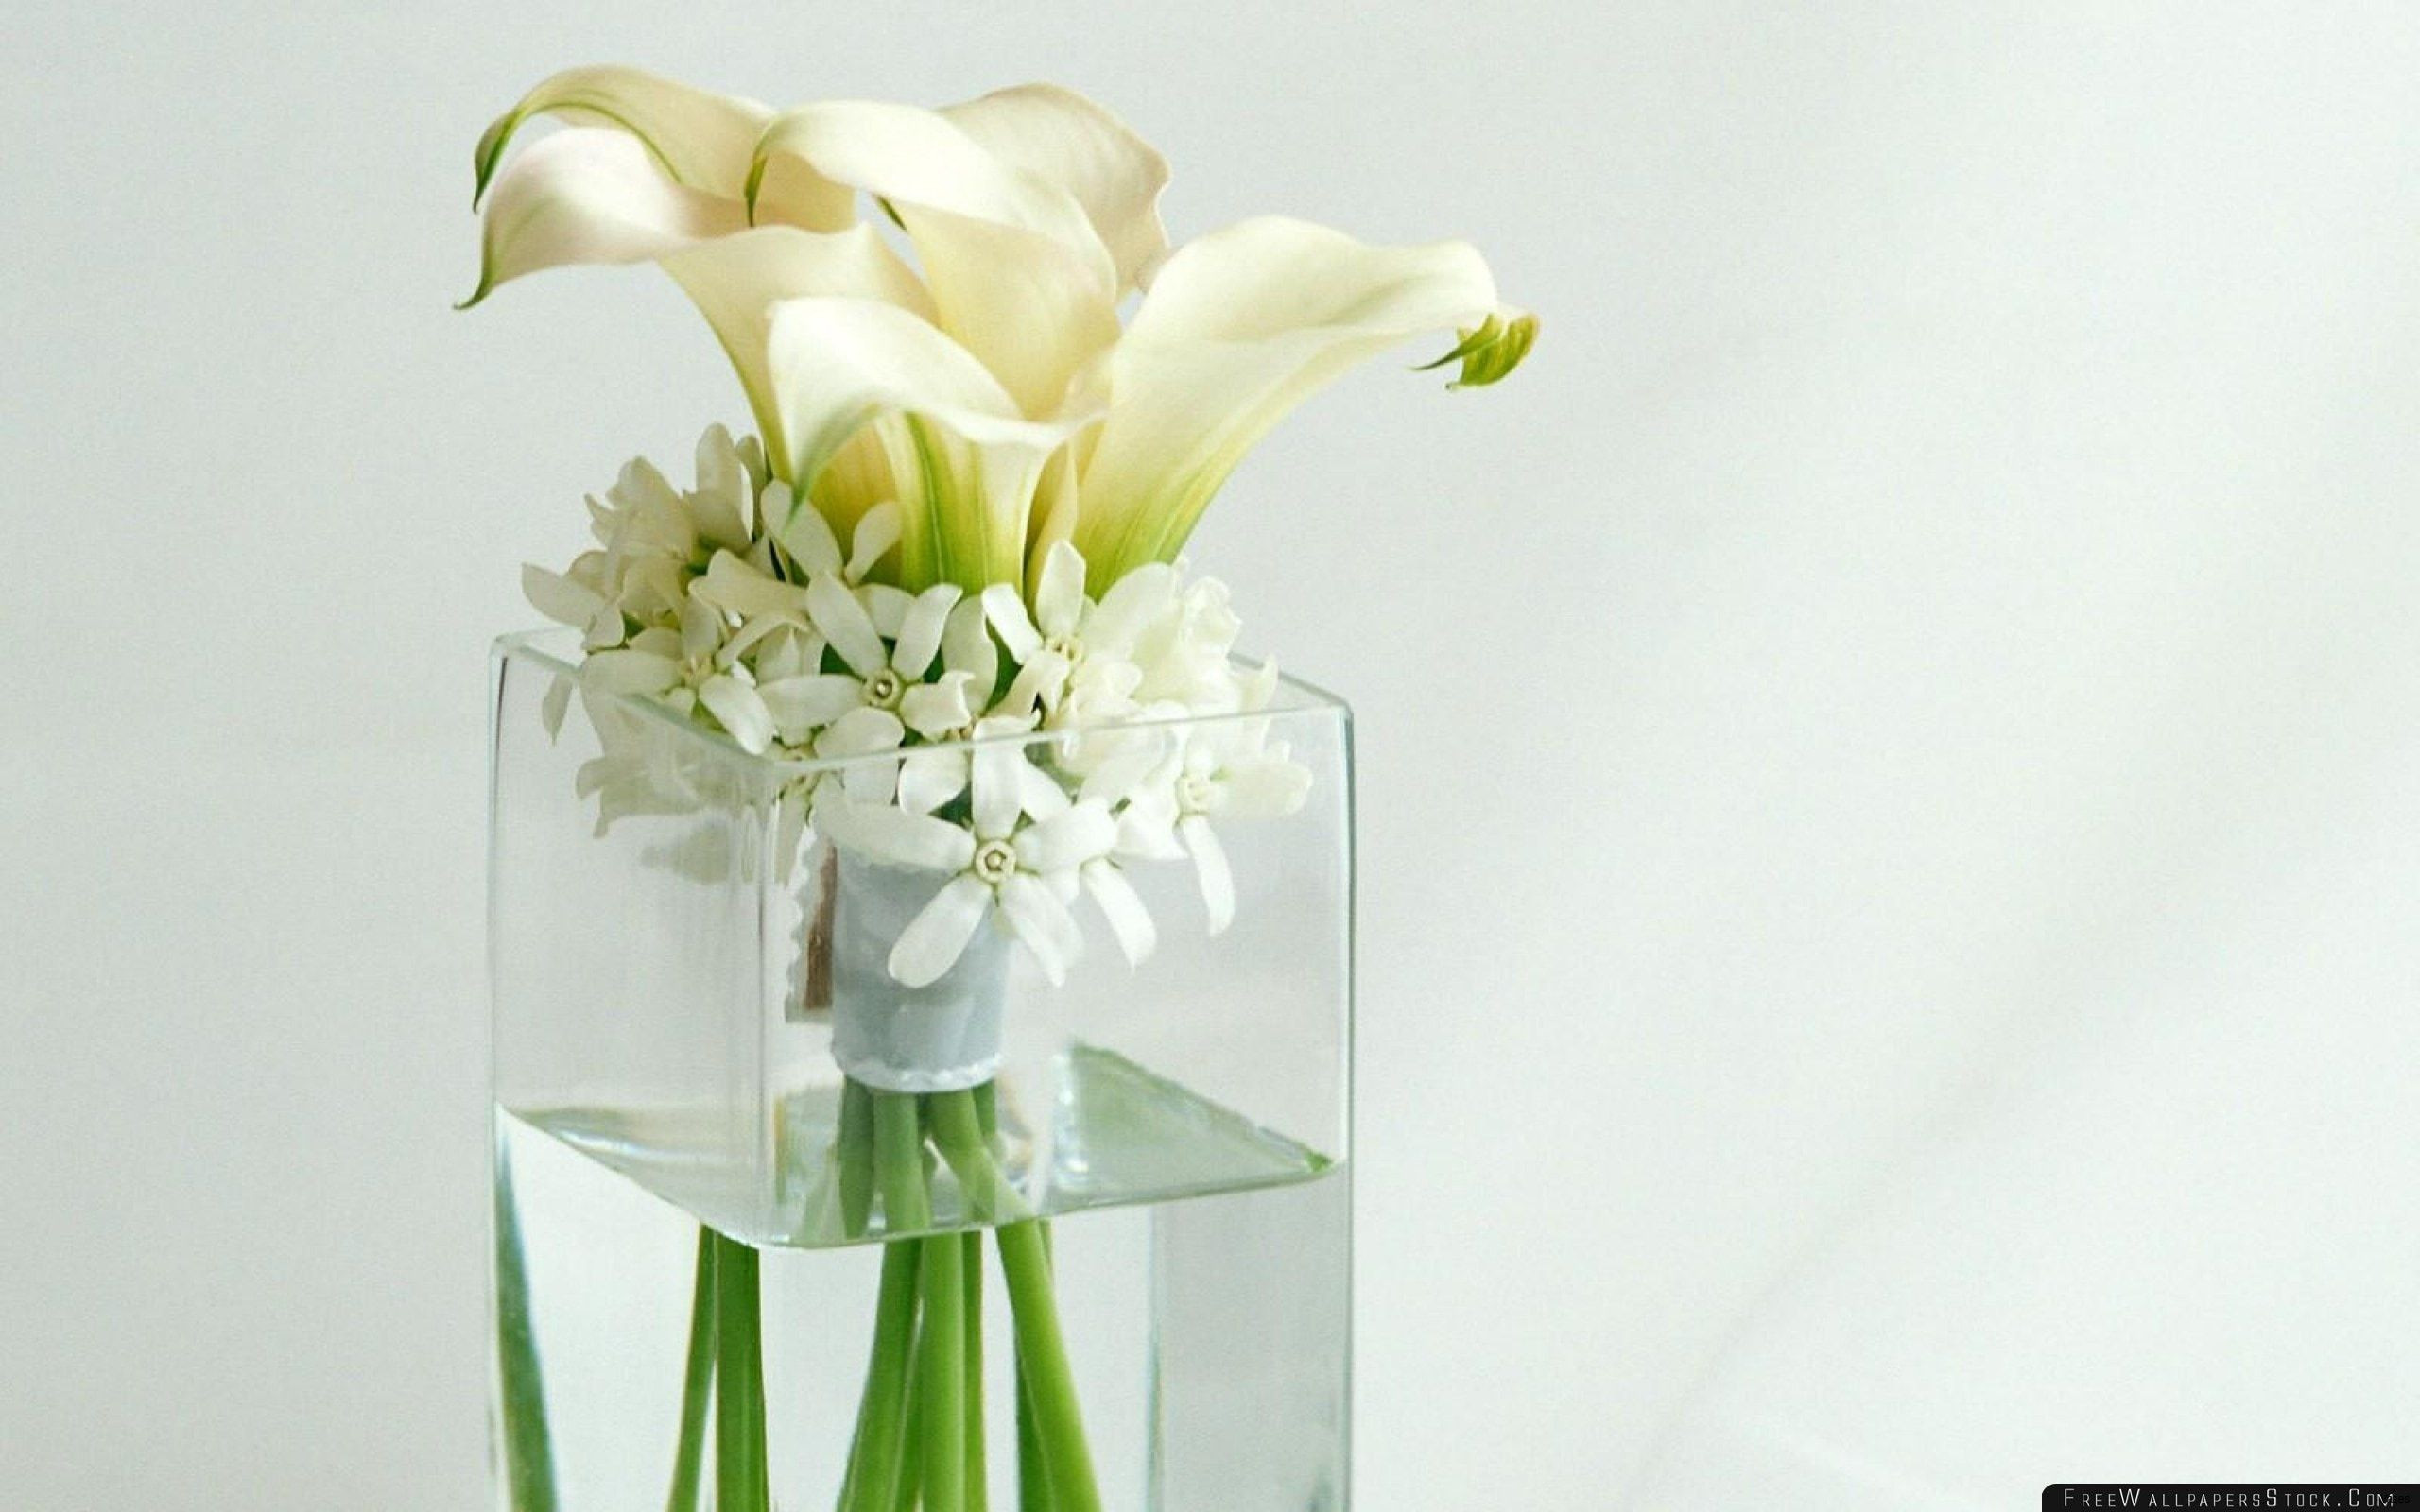 27 Unique Glass Flowers In Vase 2024 free download glass flowers in vase of flowers in glass vase new tall vase centerpiece ideas vases flowers for flowers in glass vase new tall vase centerpiece ideas vases flowers in water 0d artificial